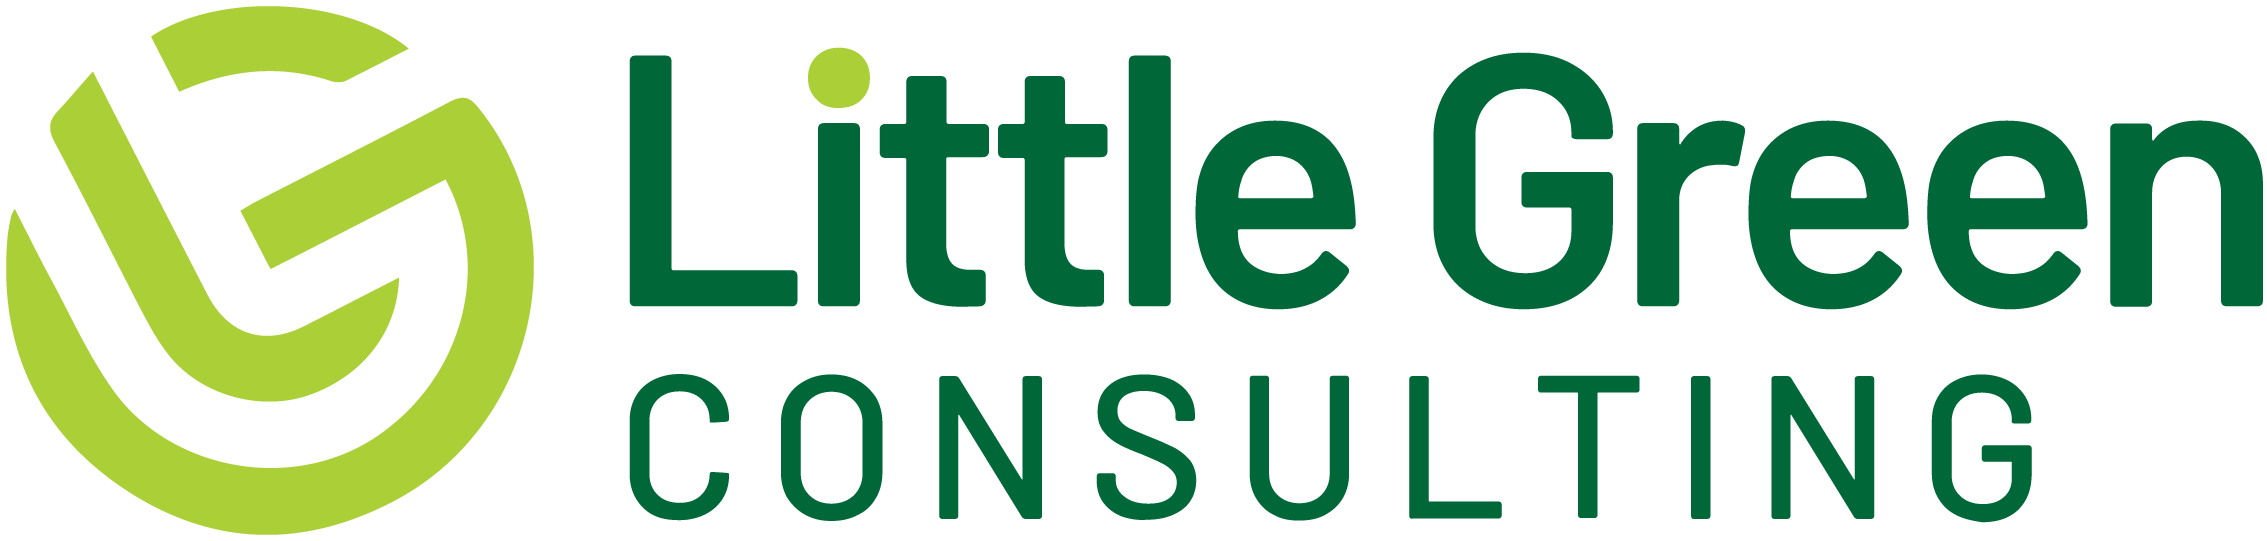 Little Green Consulting